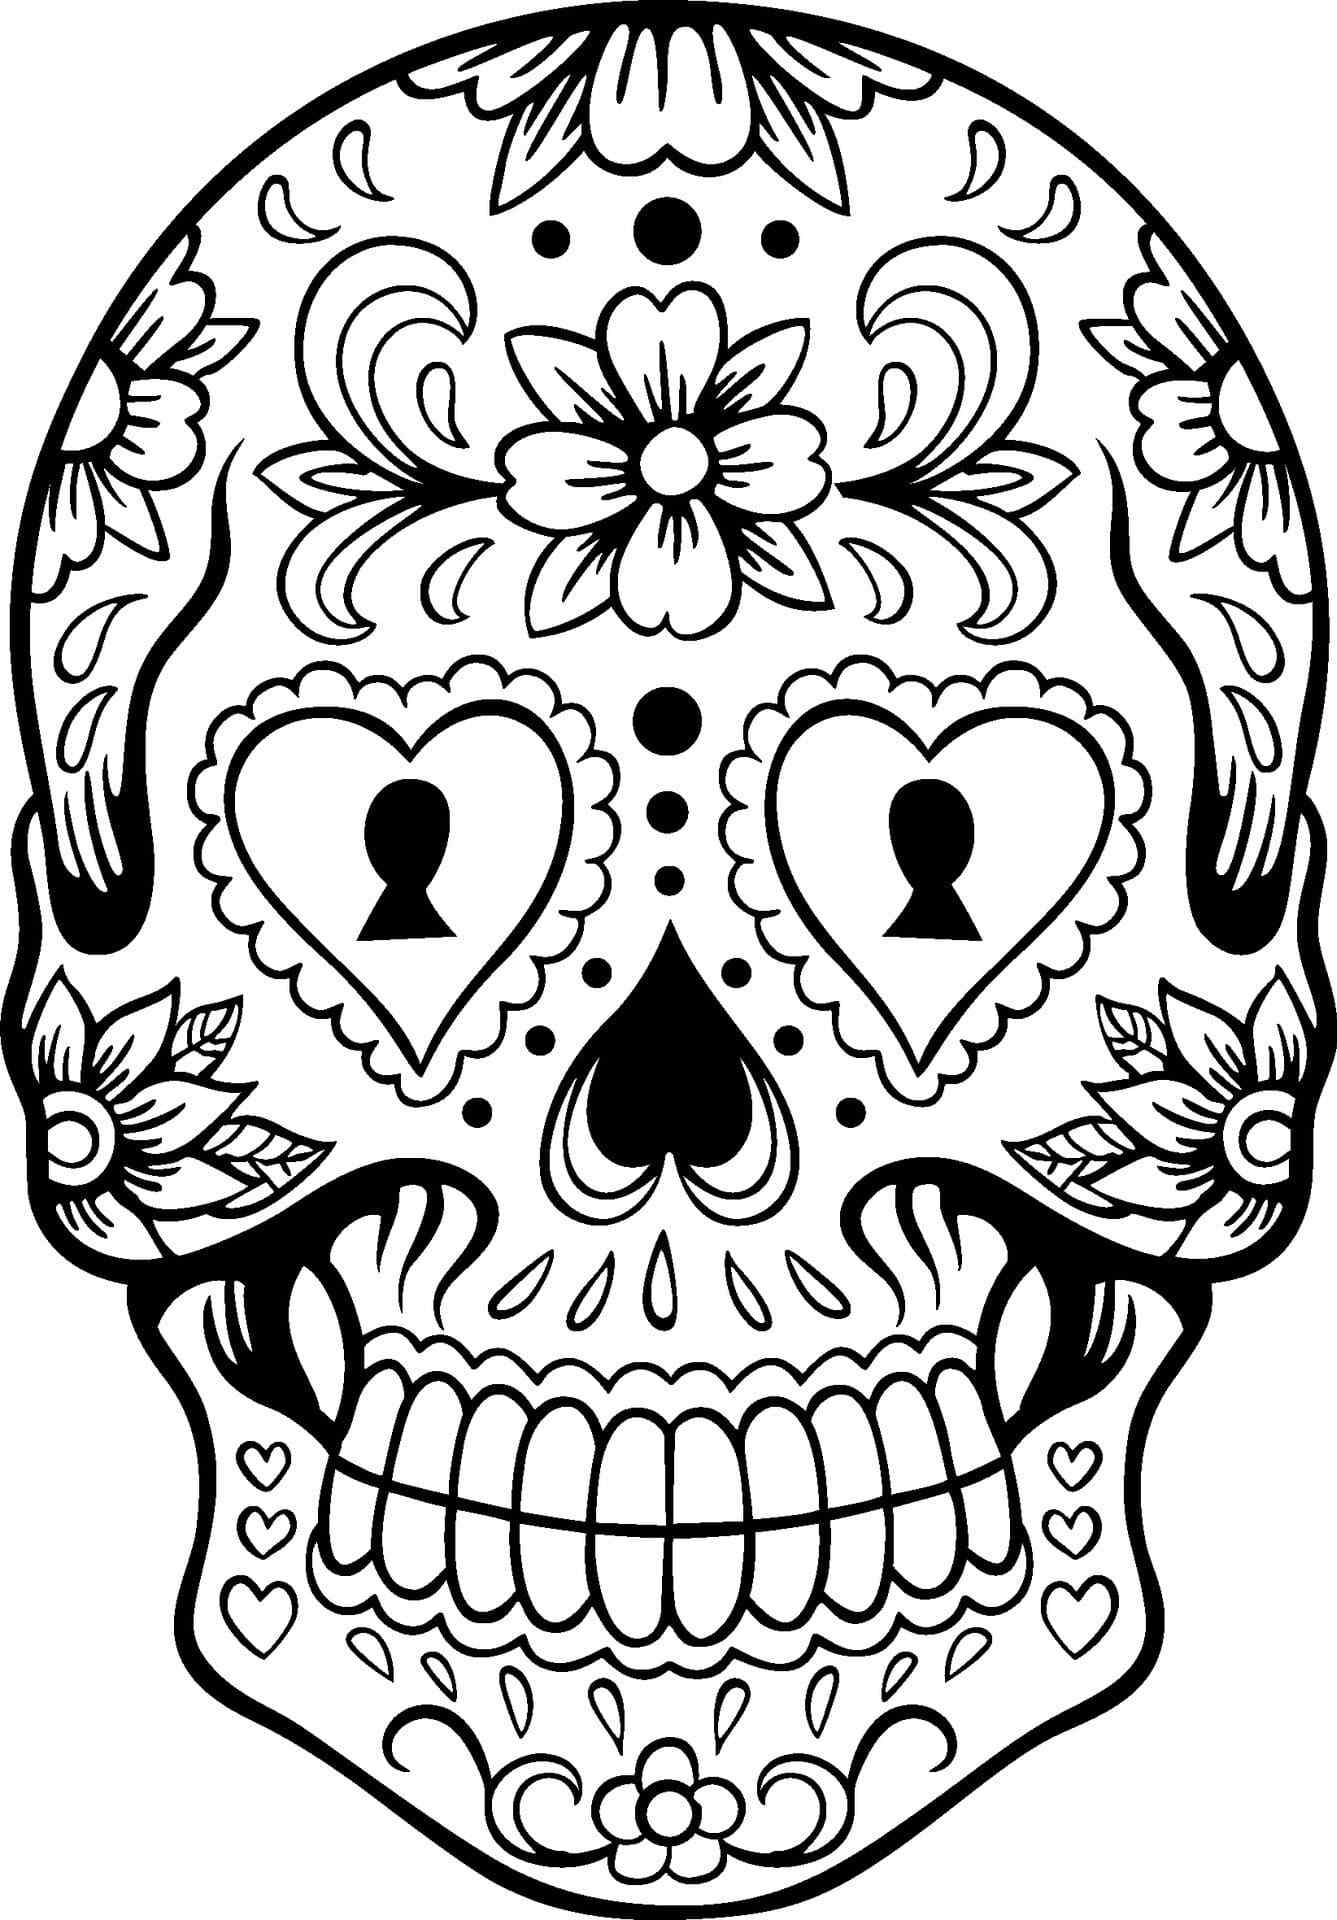 New Floral Ornament On The Skull Coloring Page